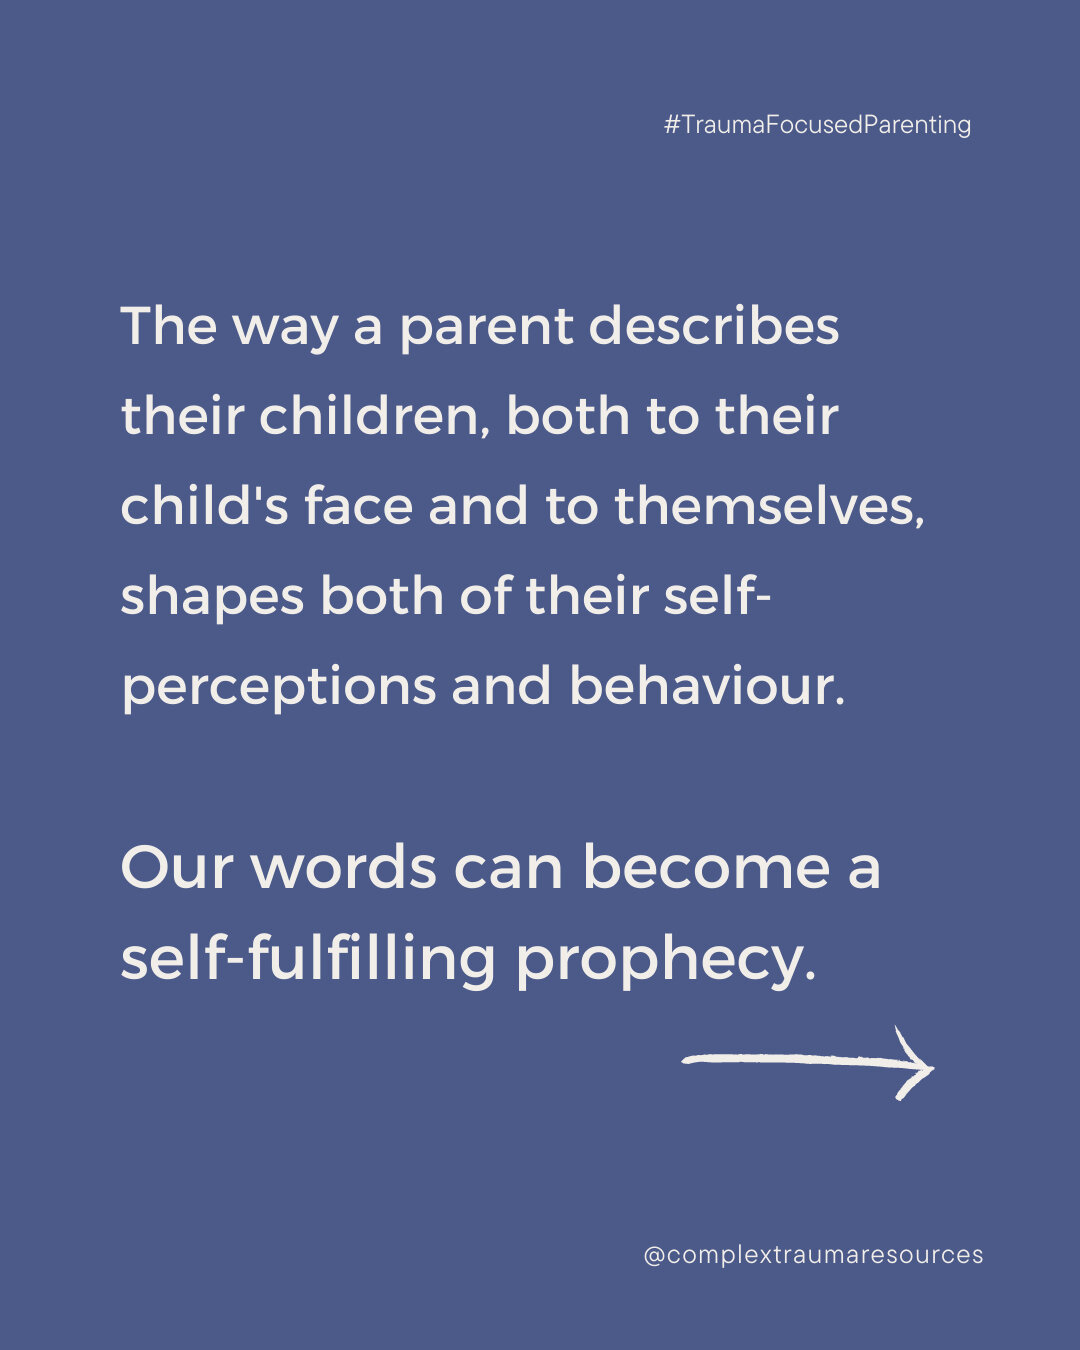 We are our children&rsquo;s mirrors, and we reframe their big behaviours to things such as:⁣- &ldquo;You haven&rsquo;t had time to learn this yet.&rdquo; 
- &ldquo;You're on a learning journey, and this is a lesson that takes time.&quot;
- &ldquo;You